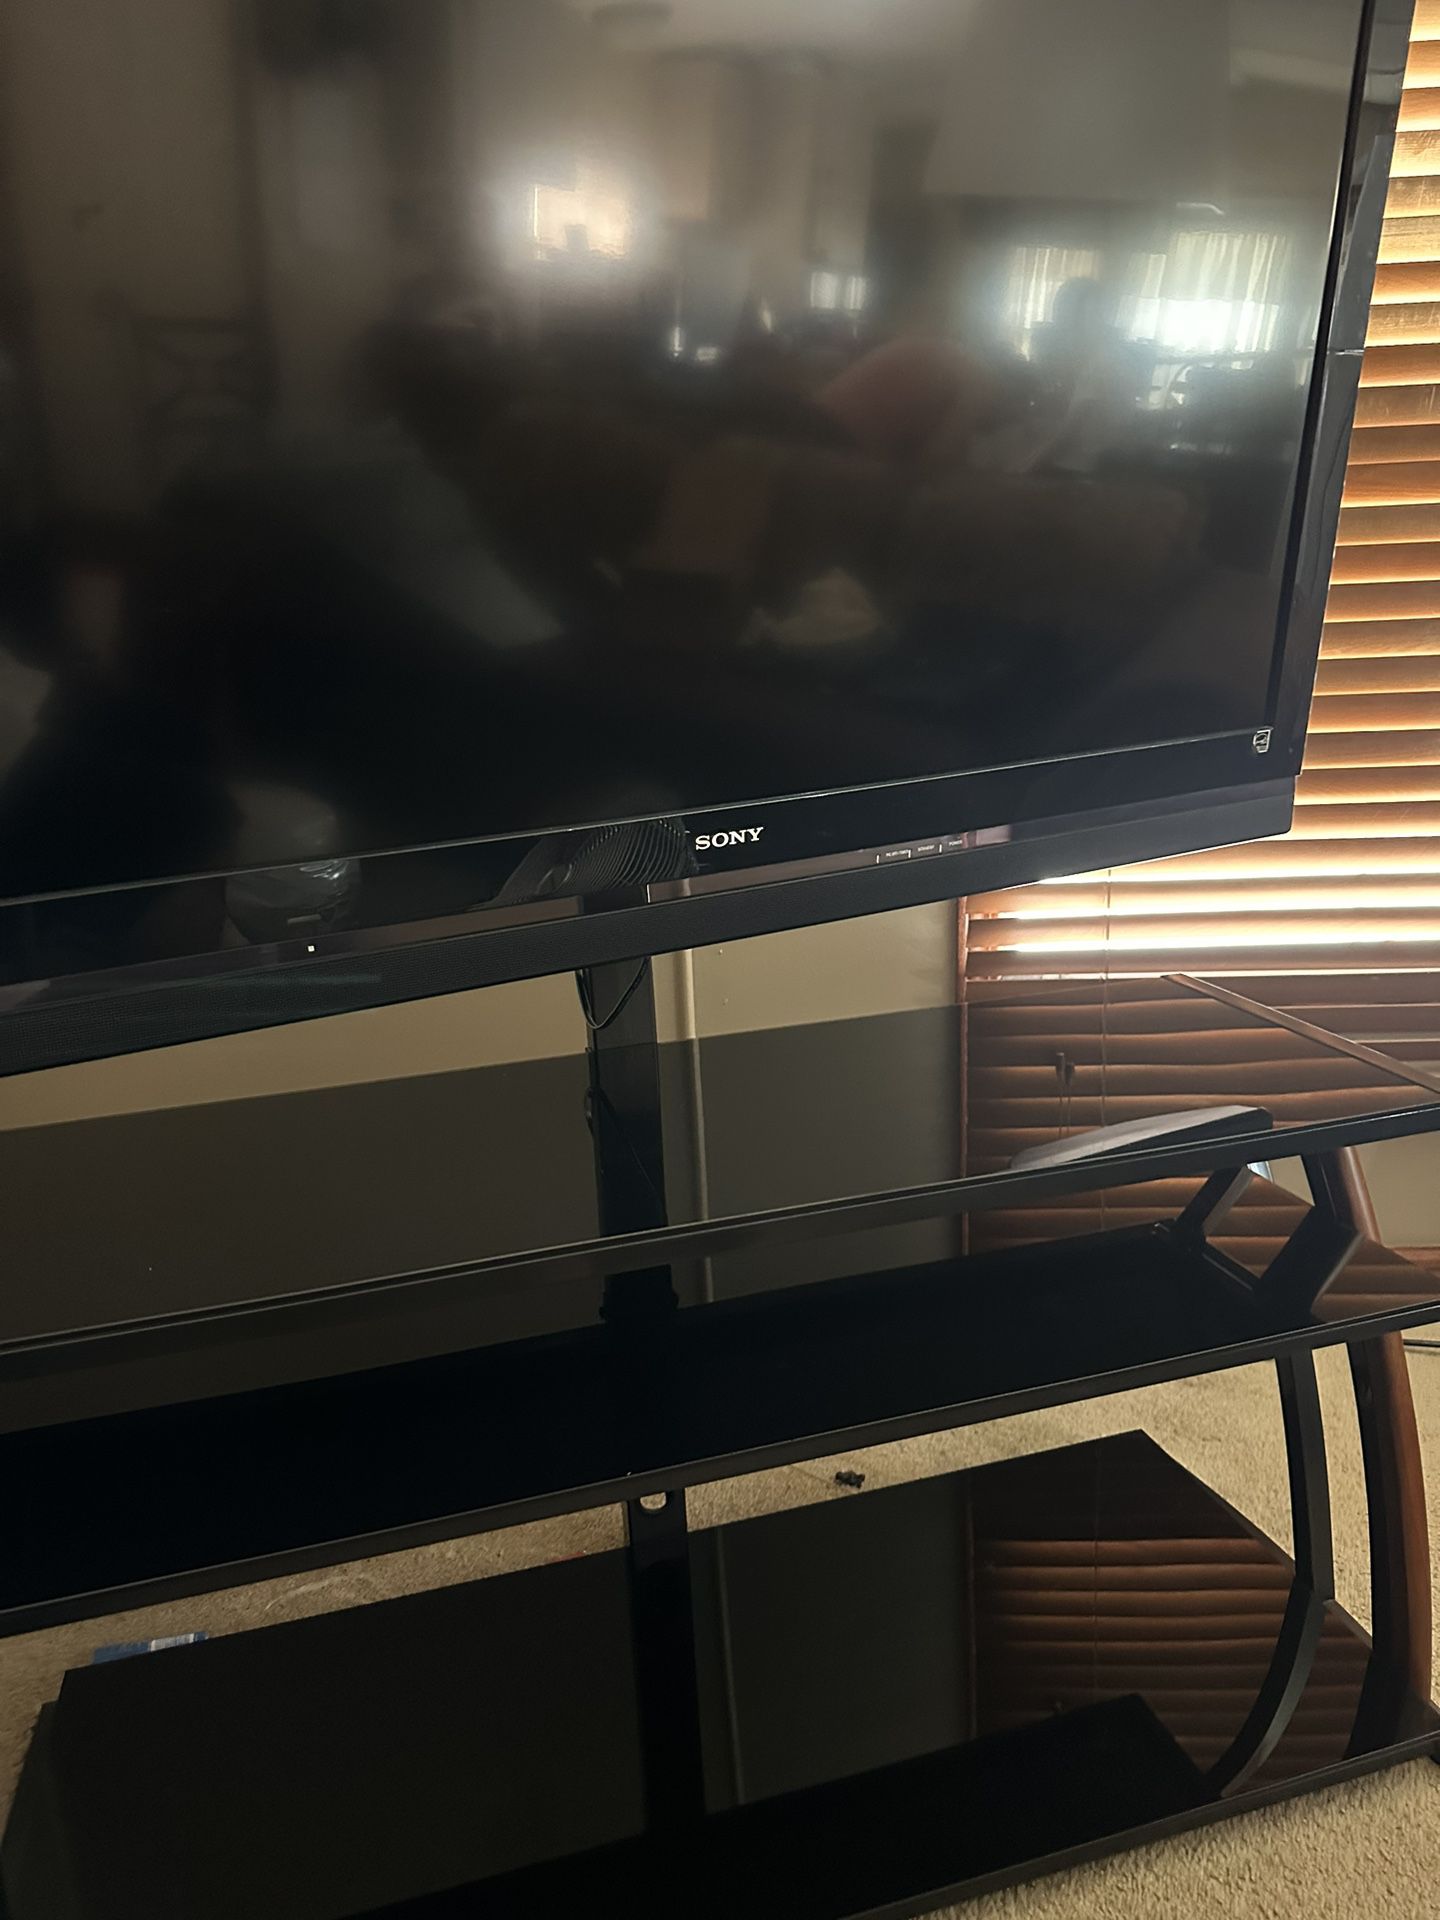 Sony Bravia Tv 52 Inch With Stand 